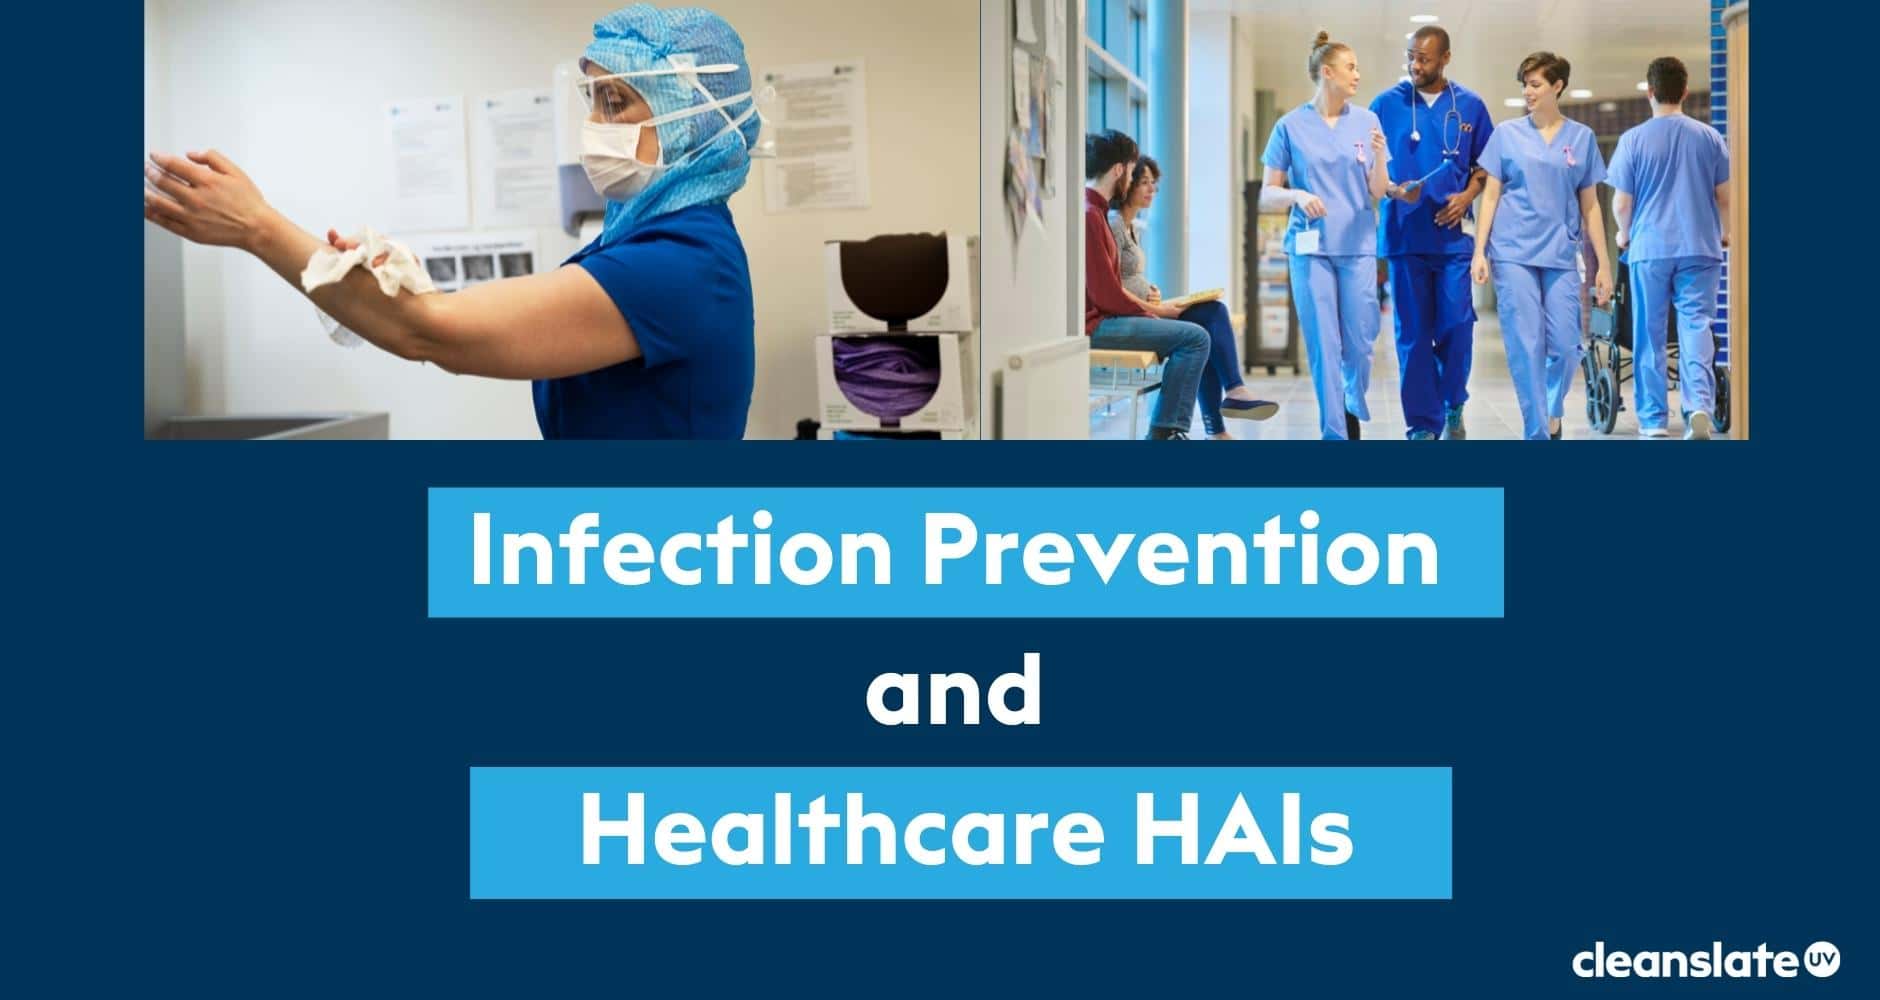 Infection Prevention and Healthcare HAIs